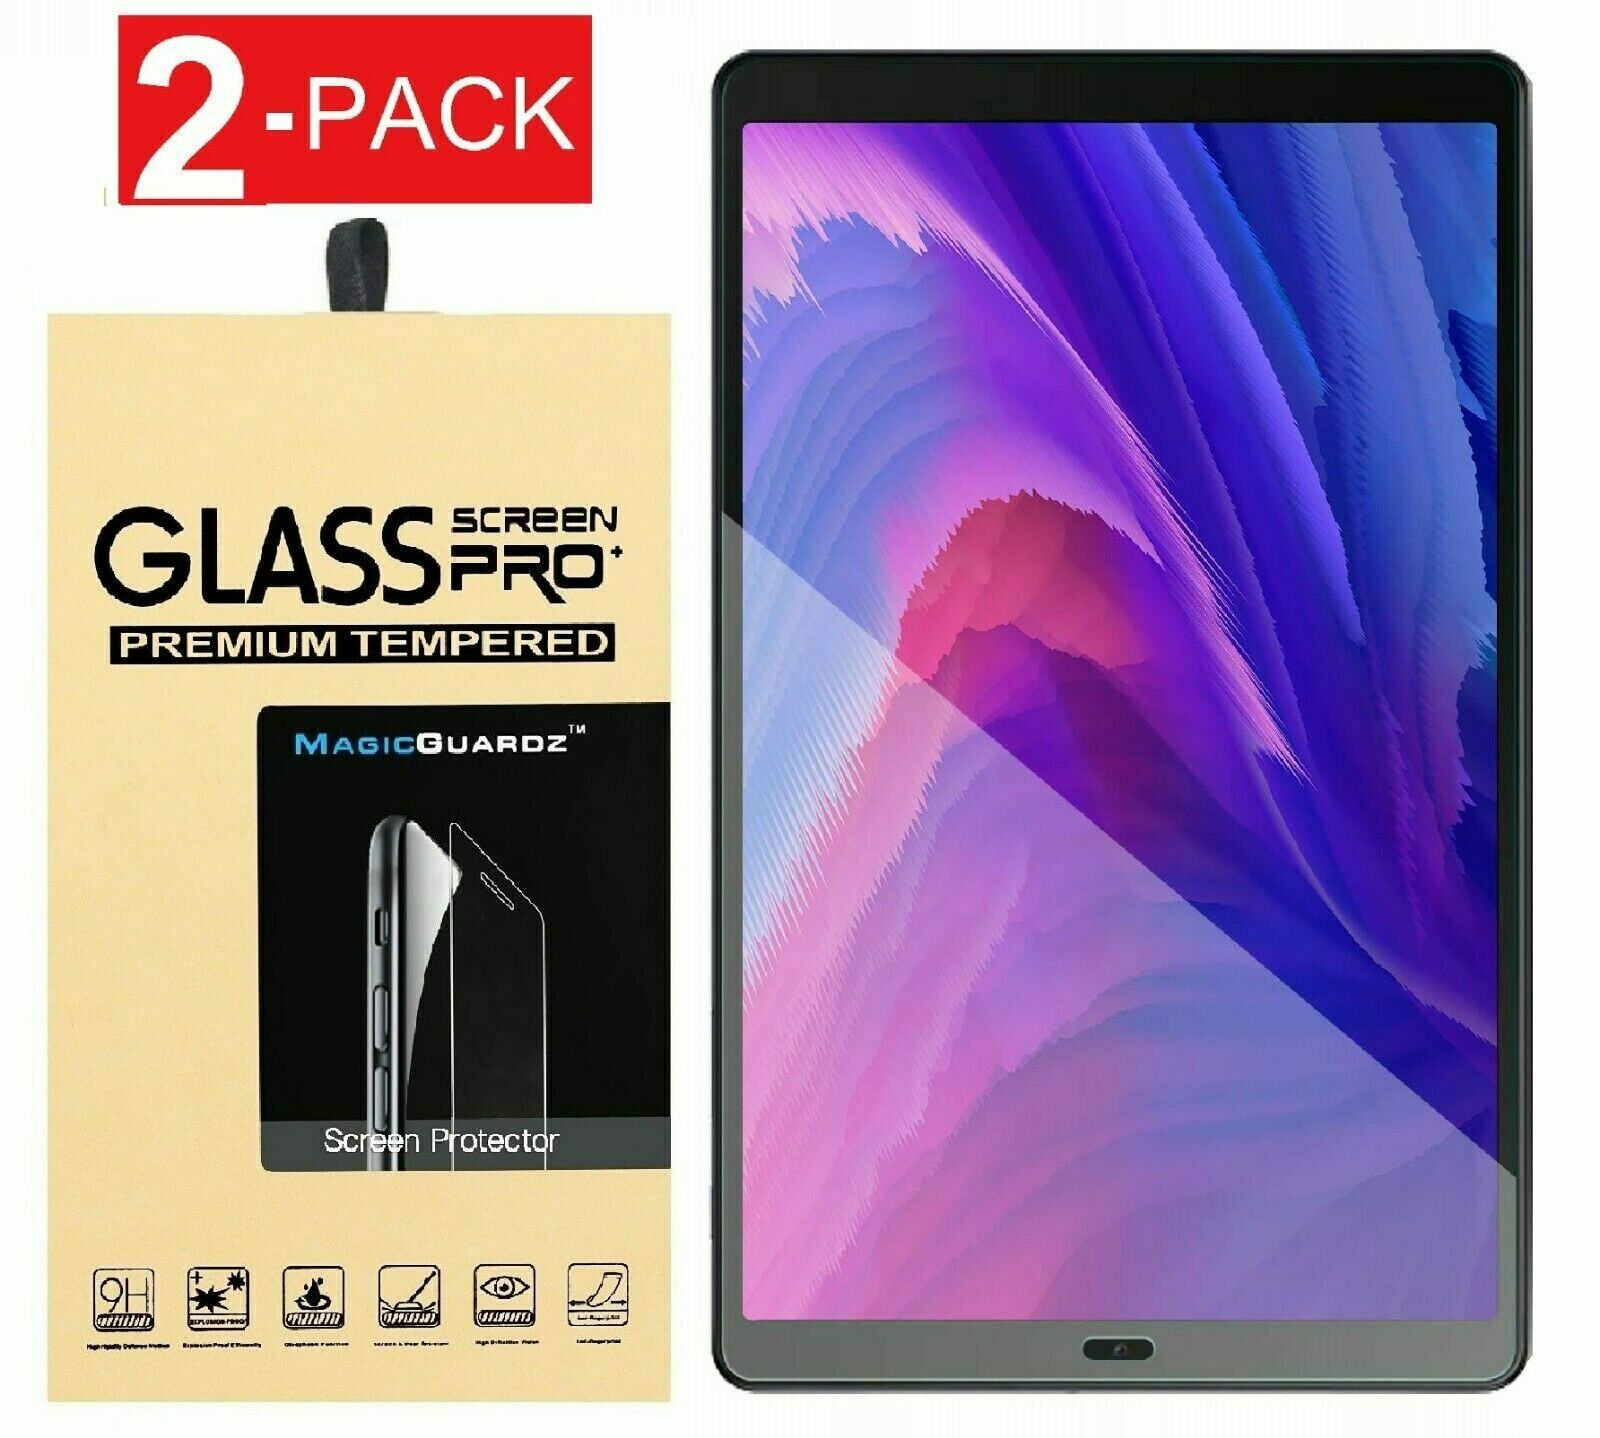 Premium Tempered Glass Screen Protector for Samsung Galaxy TAB A 10.1 T510/T515 